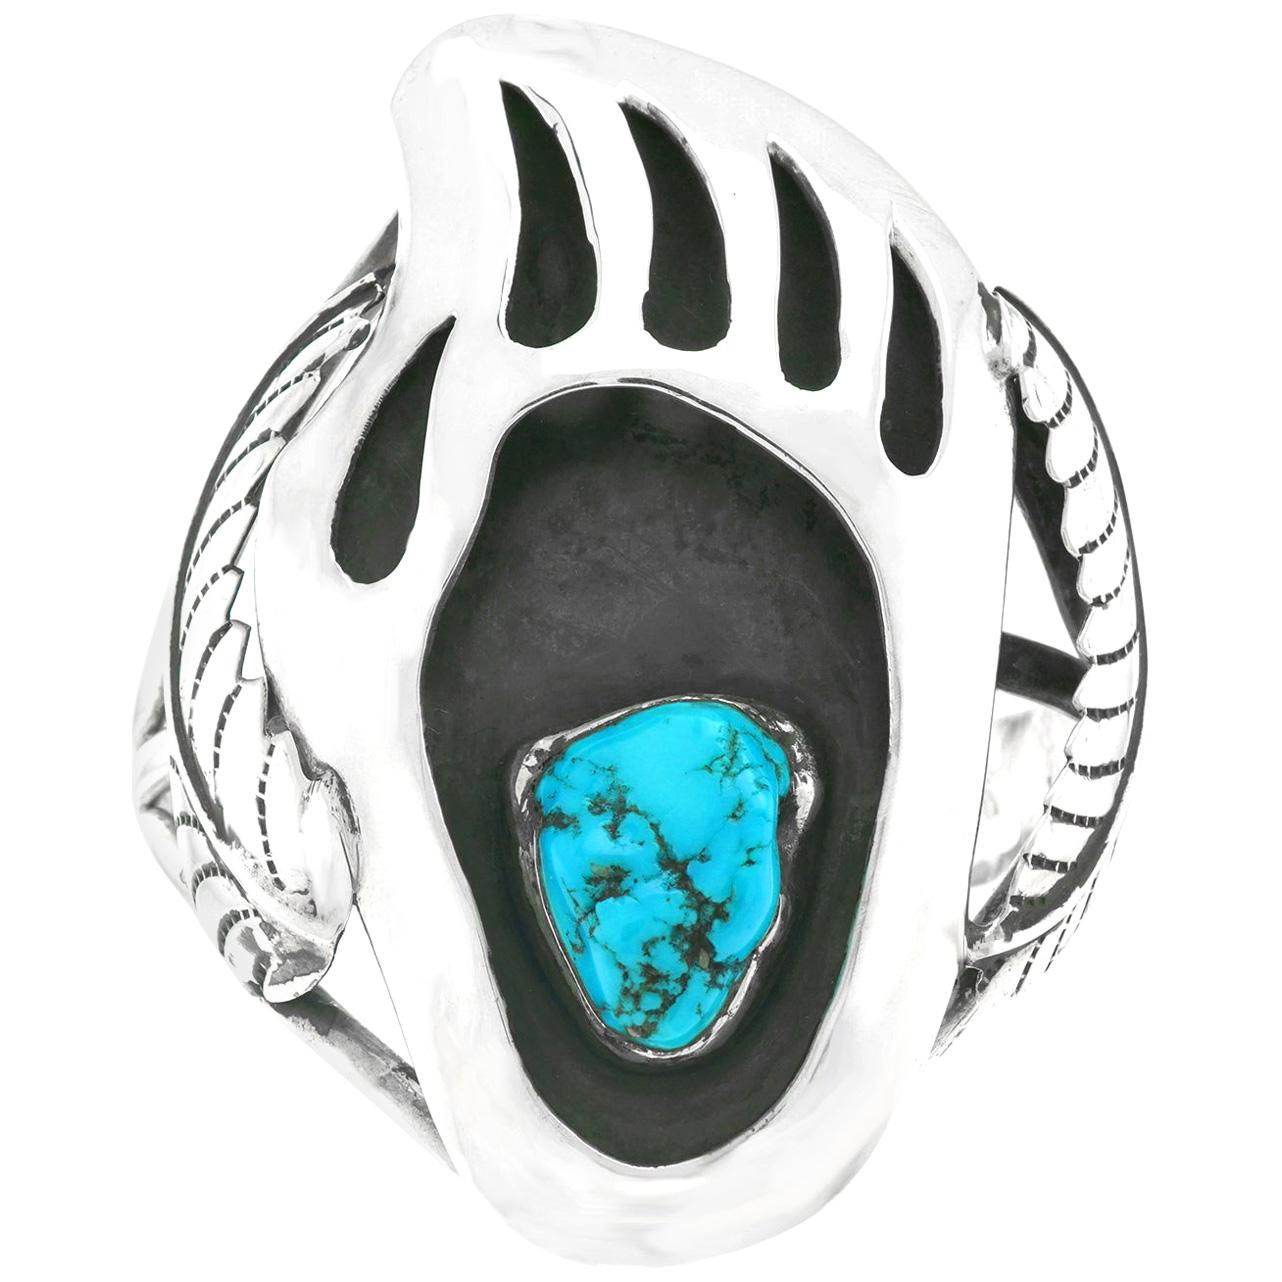 Navajo Bear Claw Sterling Cuff Bracelet with Turquoise